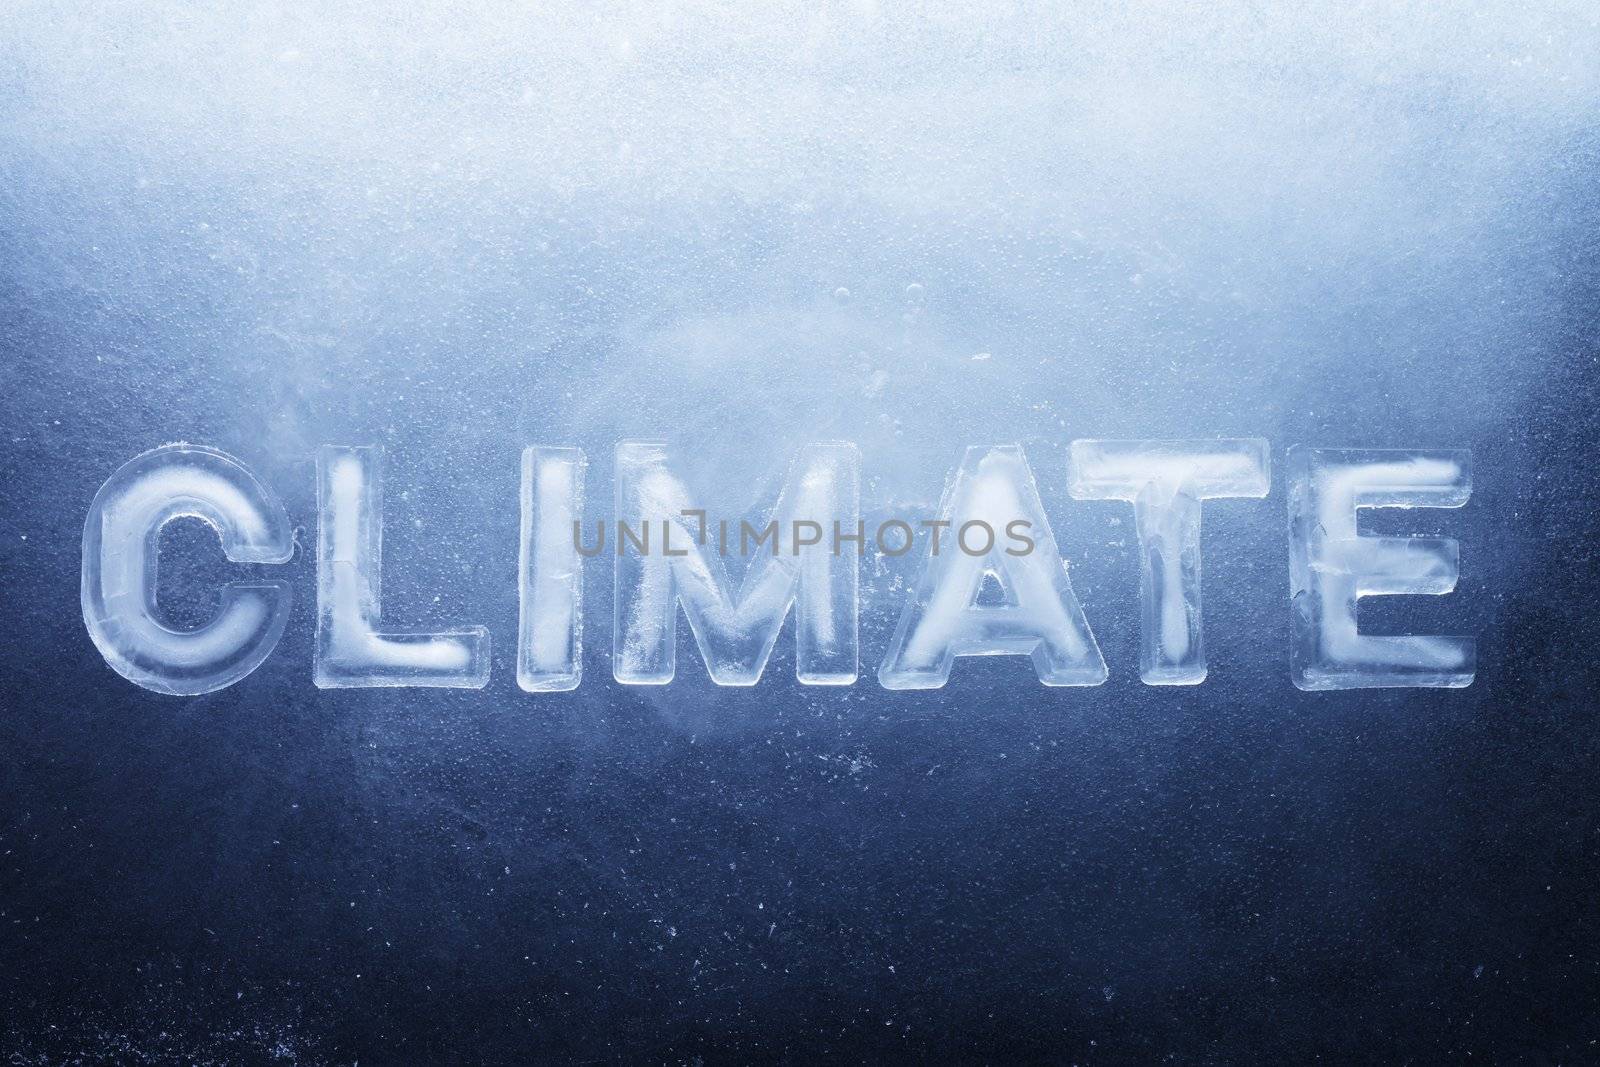 Word "Climate" made of real ice letters on ice background.